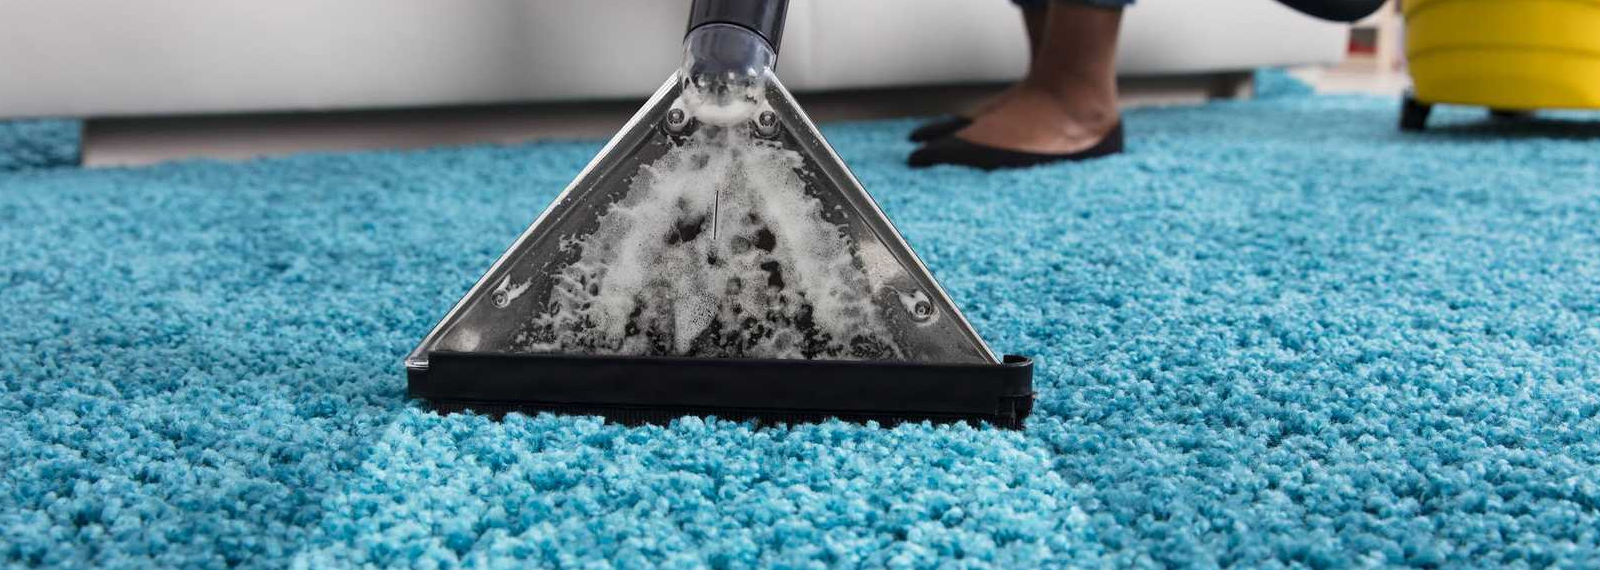 Rug Rescue Inc Carpet Cleaning Puyallup Wa